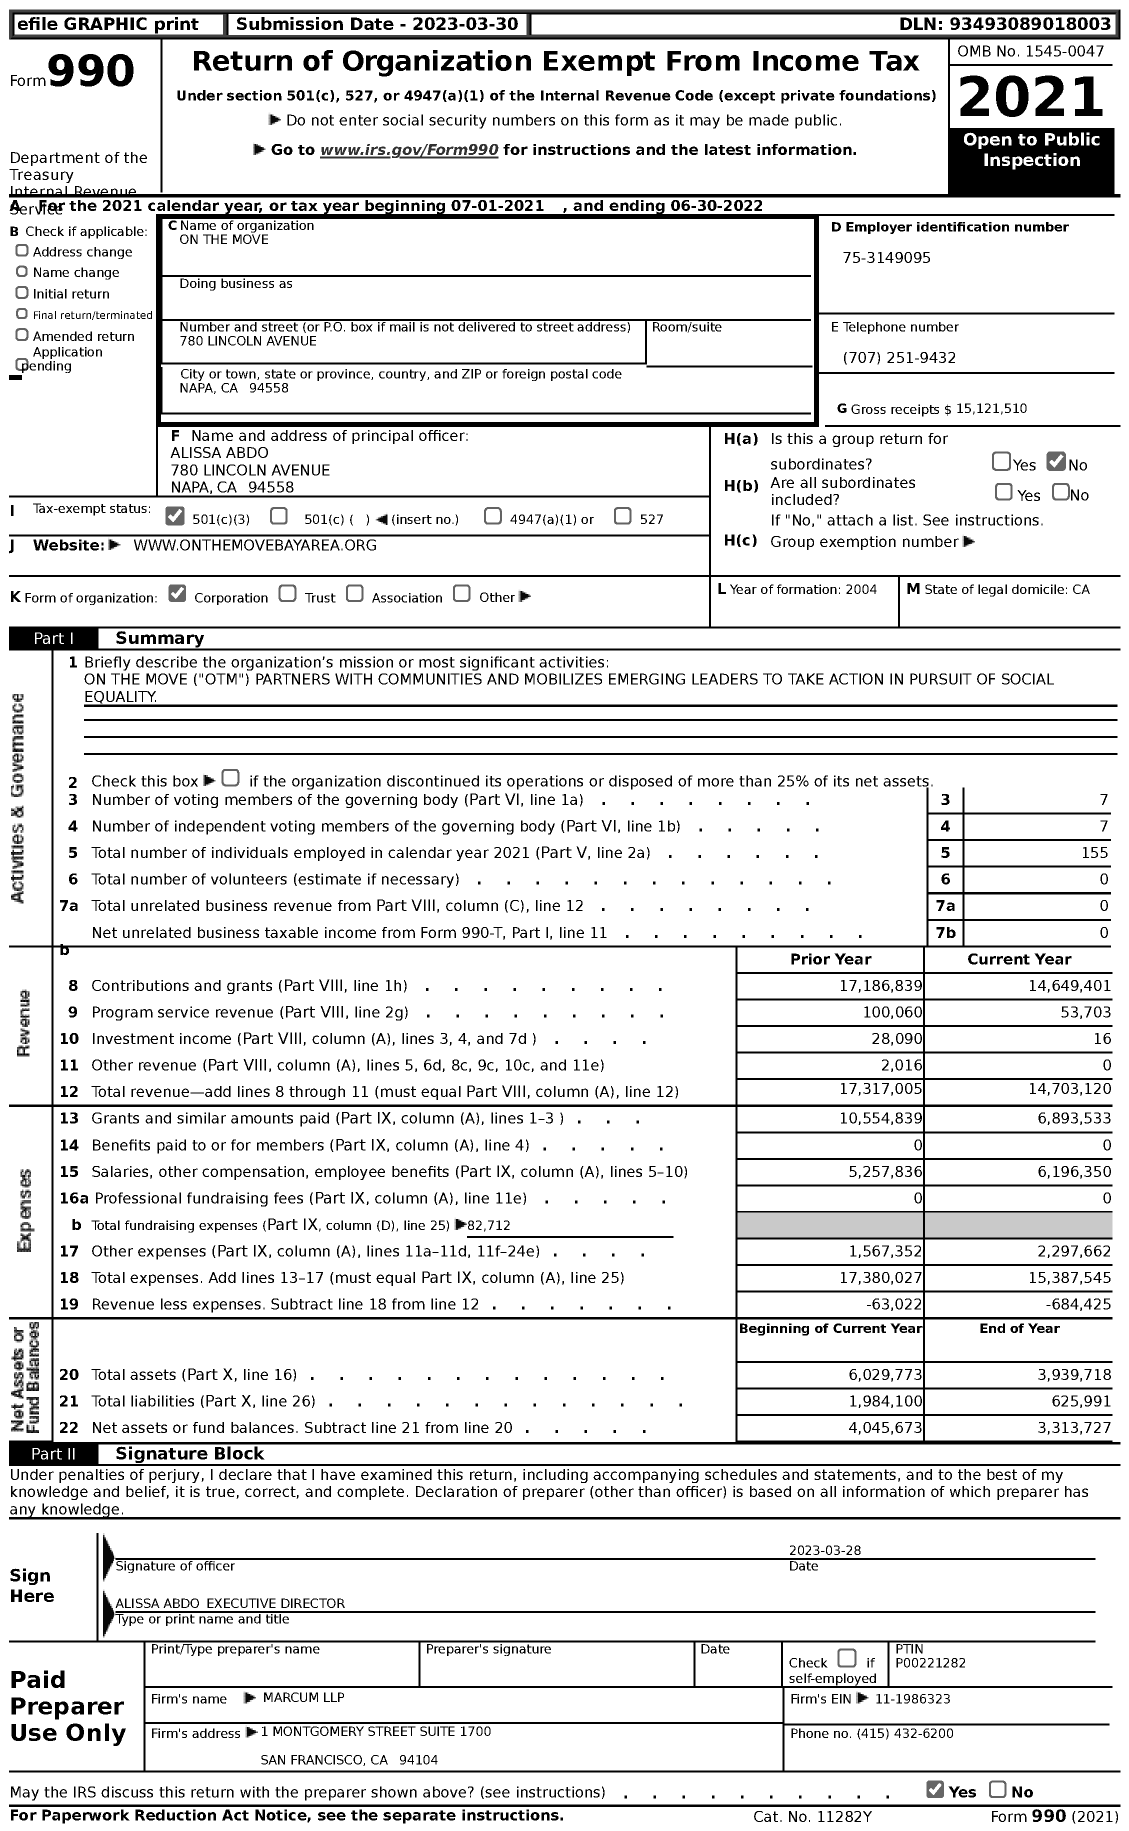 Image of first page of 2021 Form 990 for On the Move (OTM)